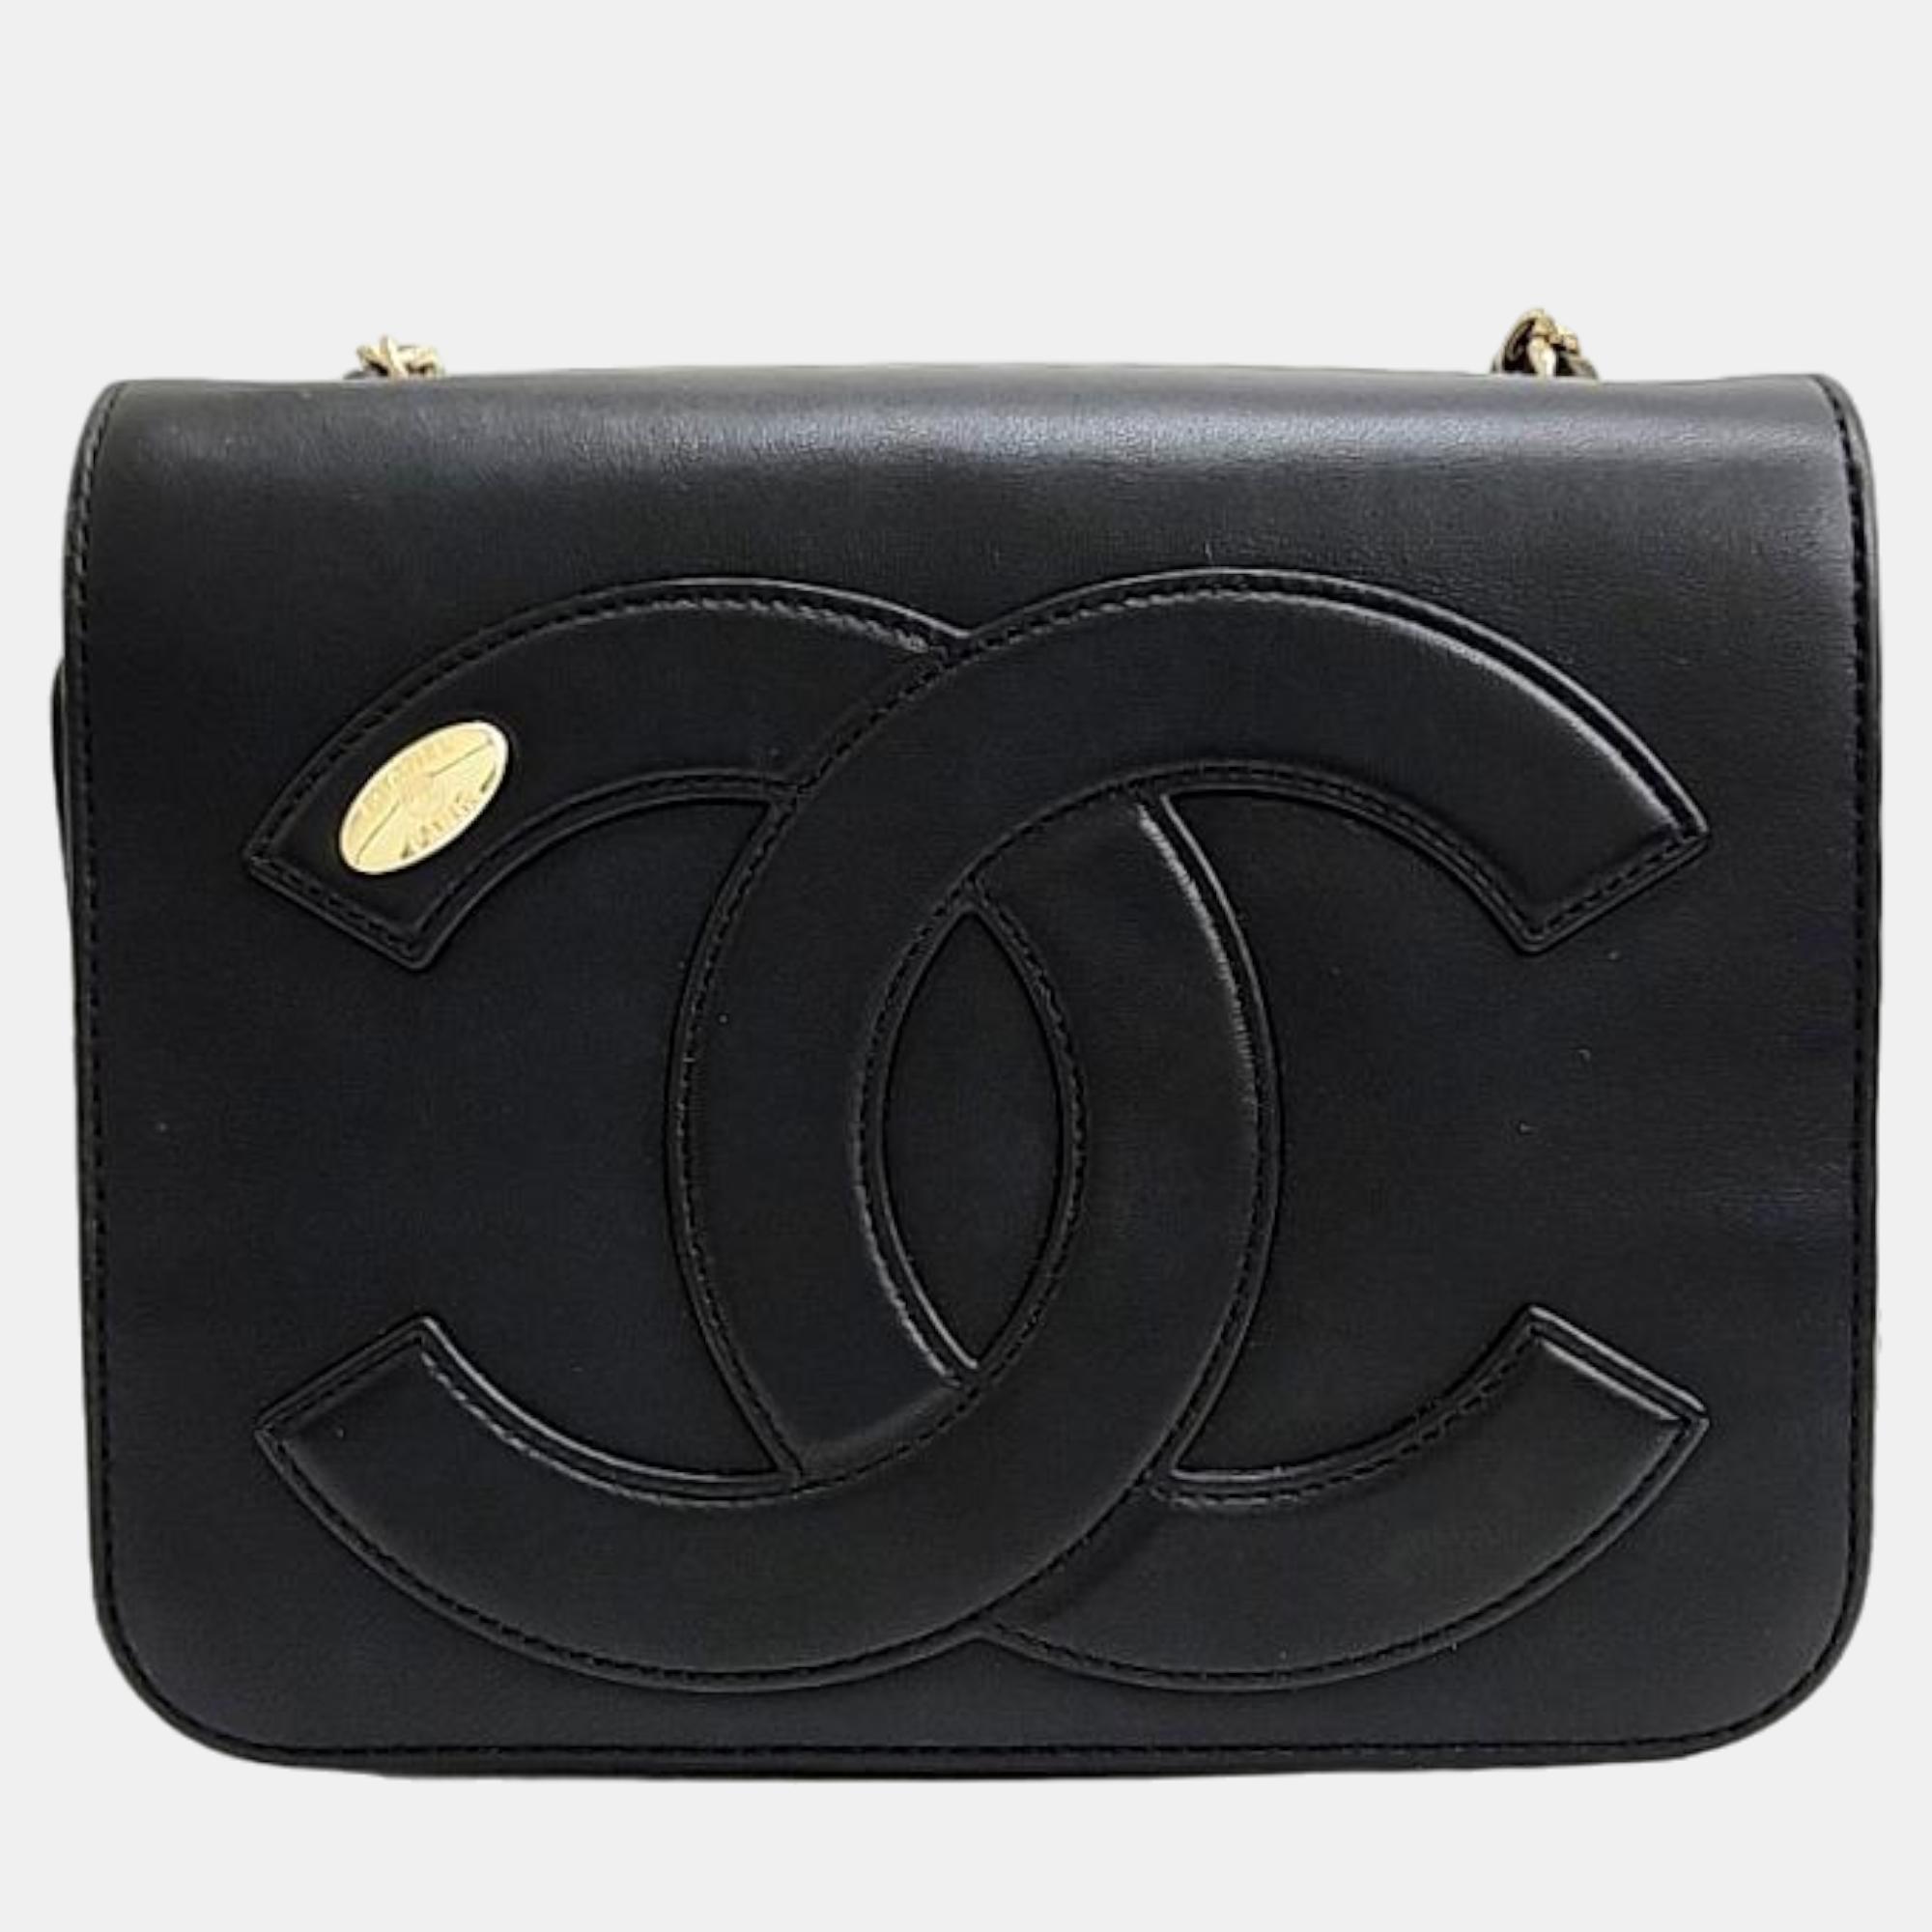 Indulge in luxury with this Chanel bag. Meticulously crafted from premium materials it combines exquisite design impeccable craftsmanship and timeless elegance. Elevate your style with this fashion accessory.